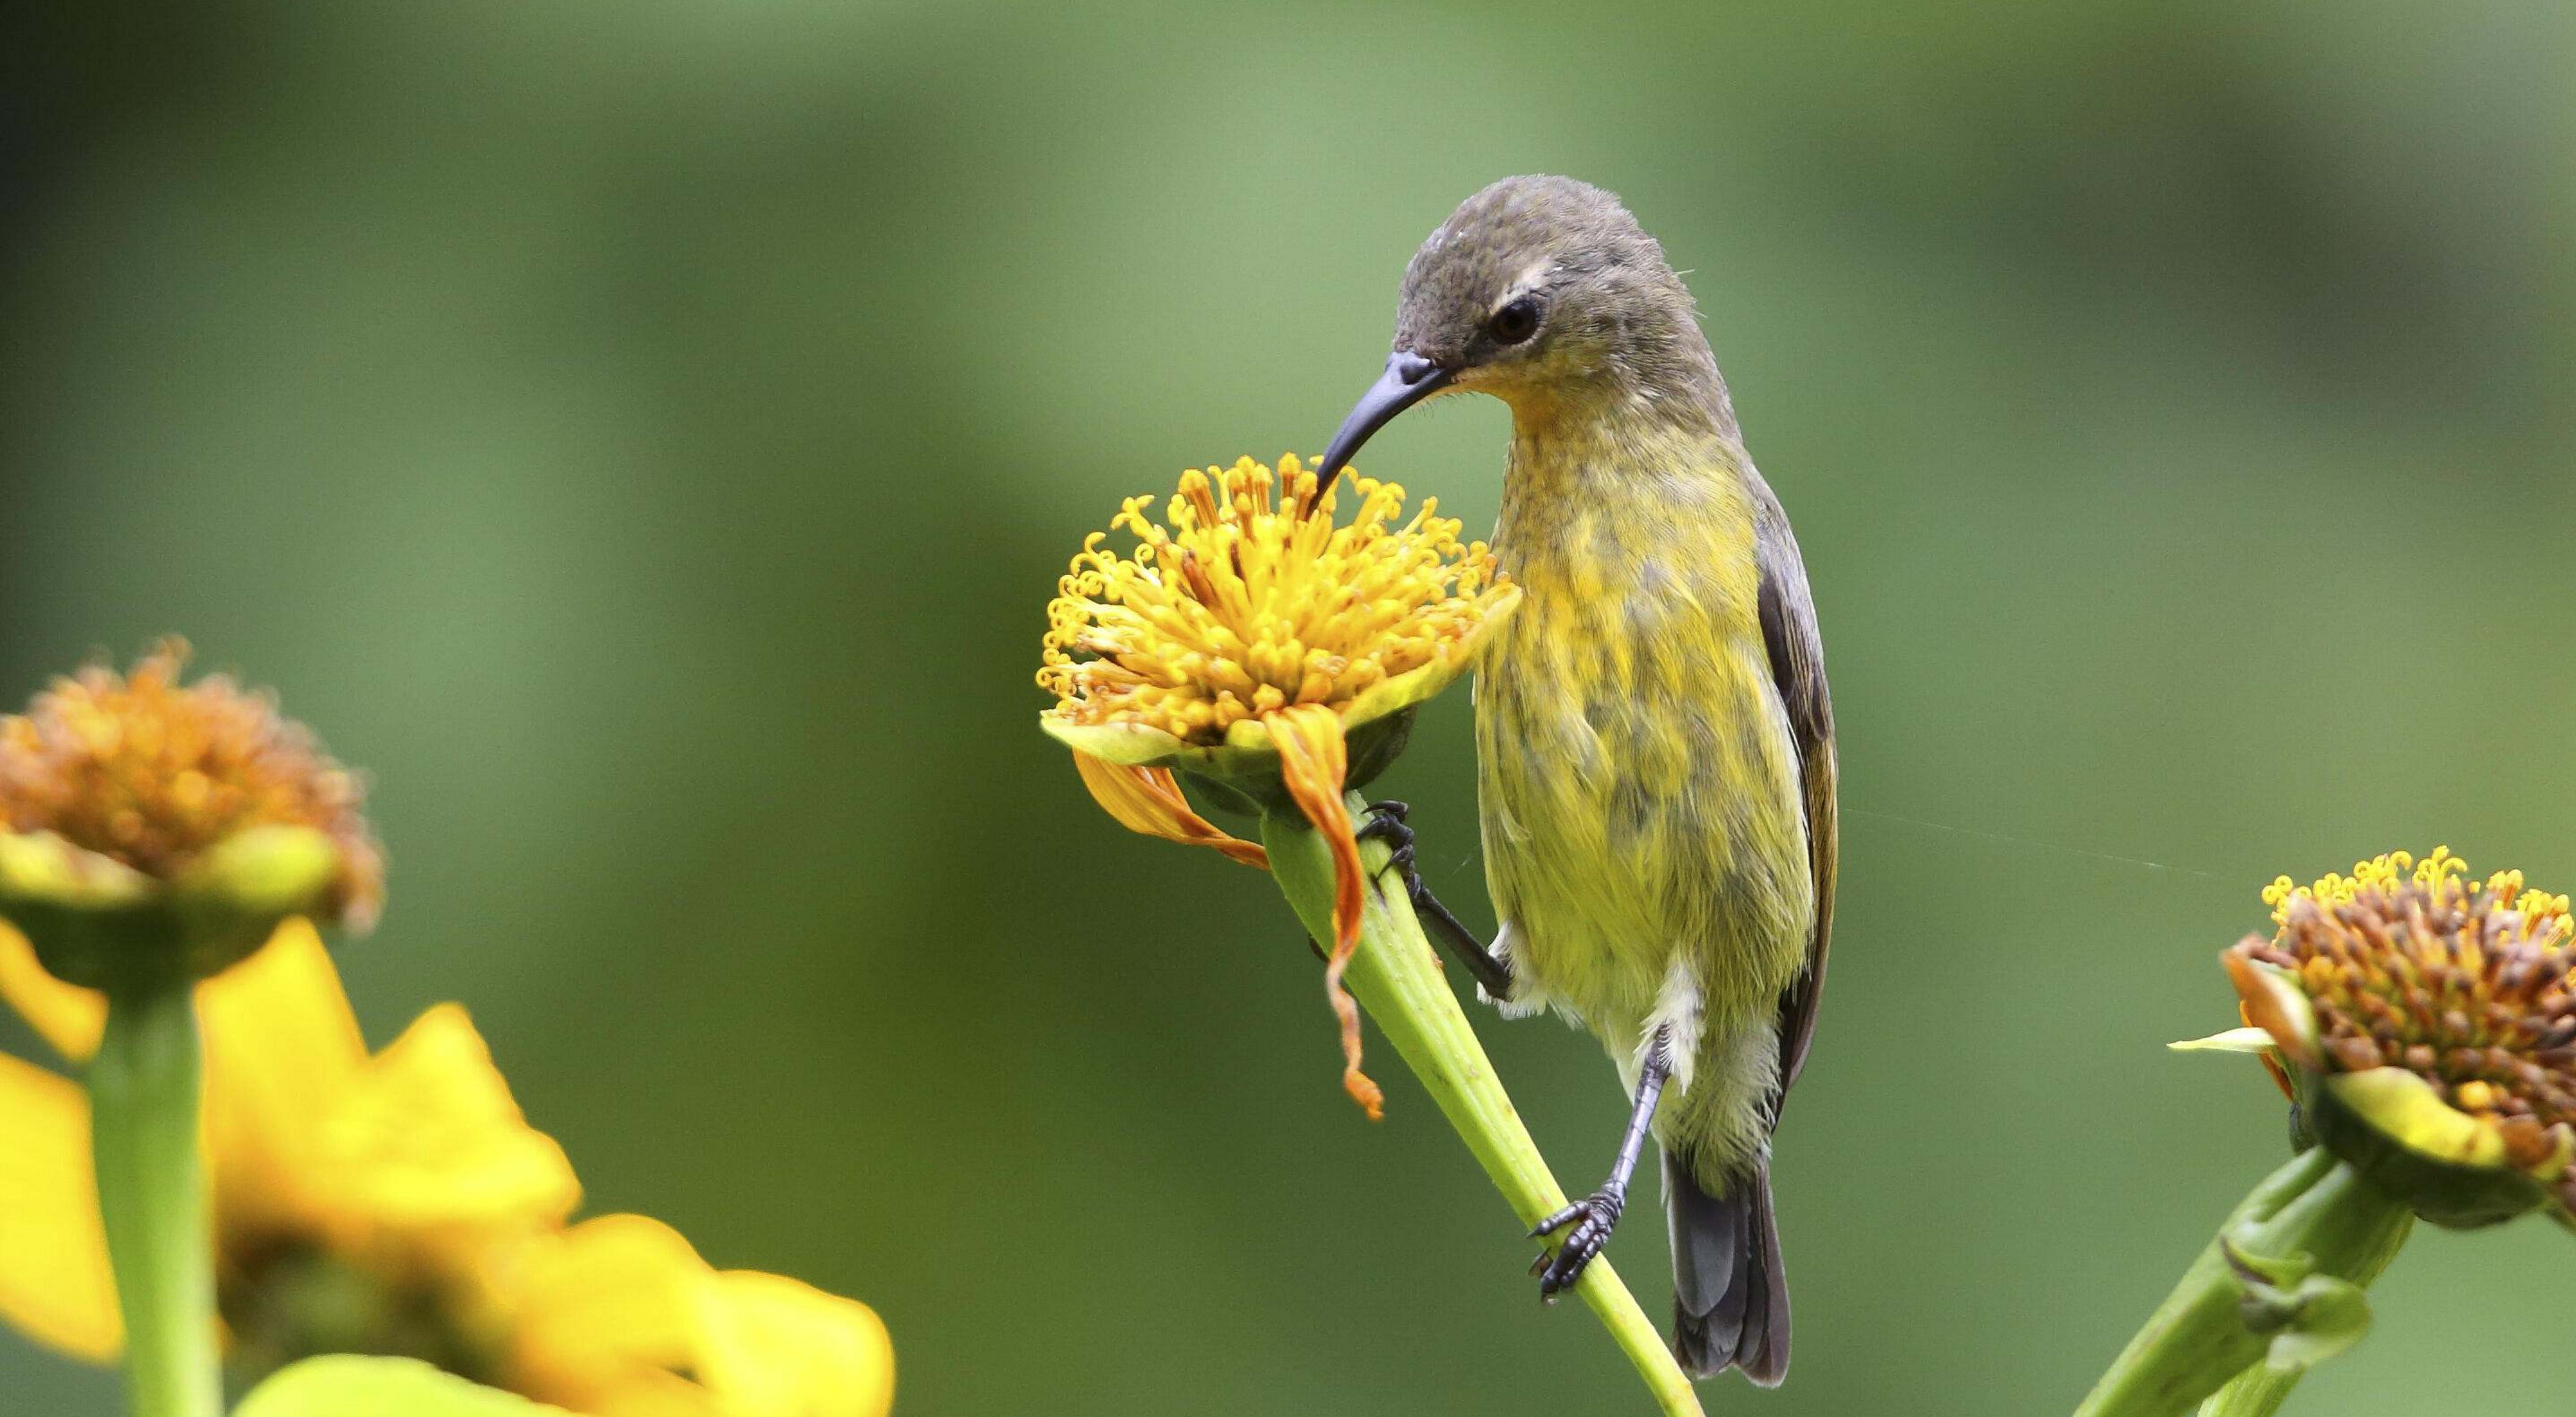 A yellow bird with a curved beak sips nectar from a flower.